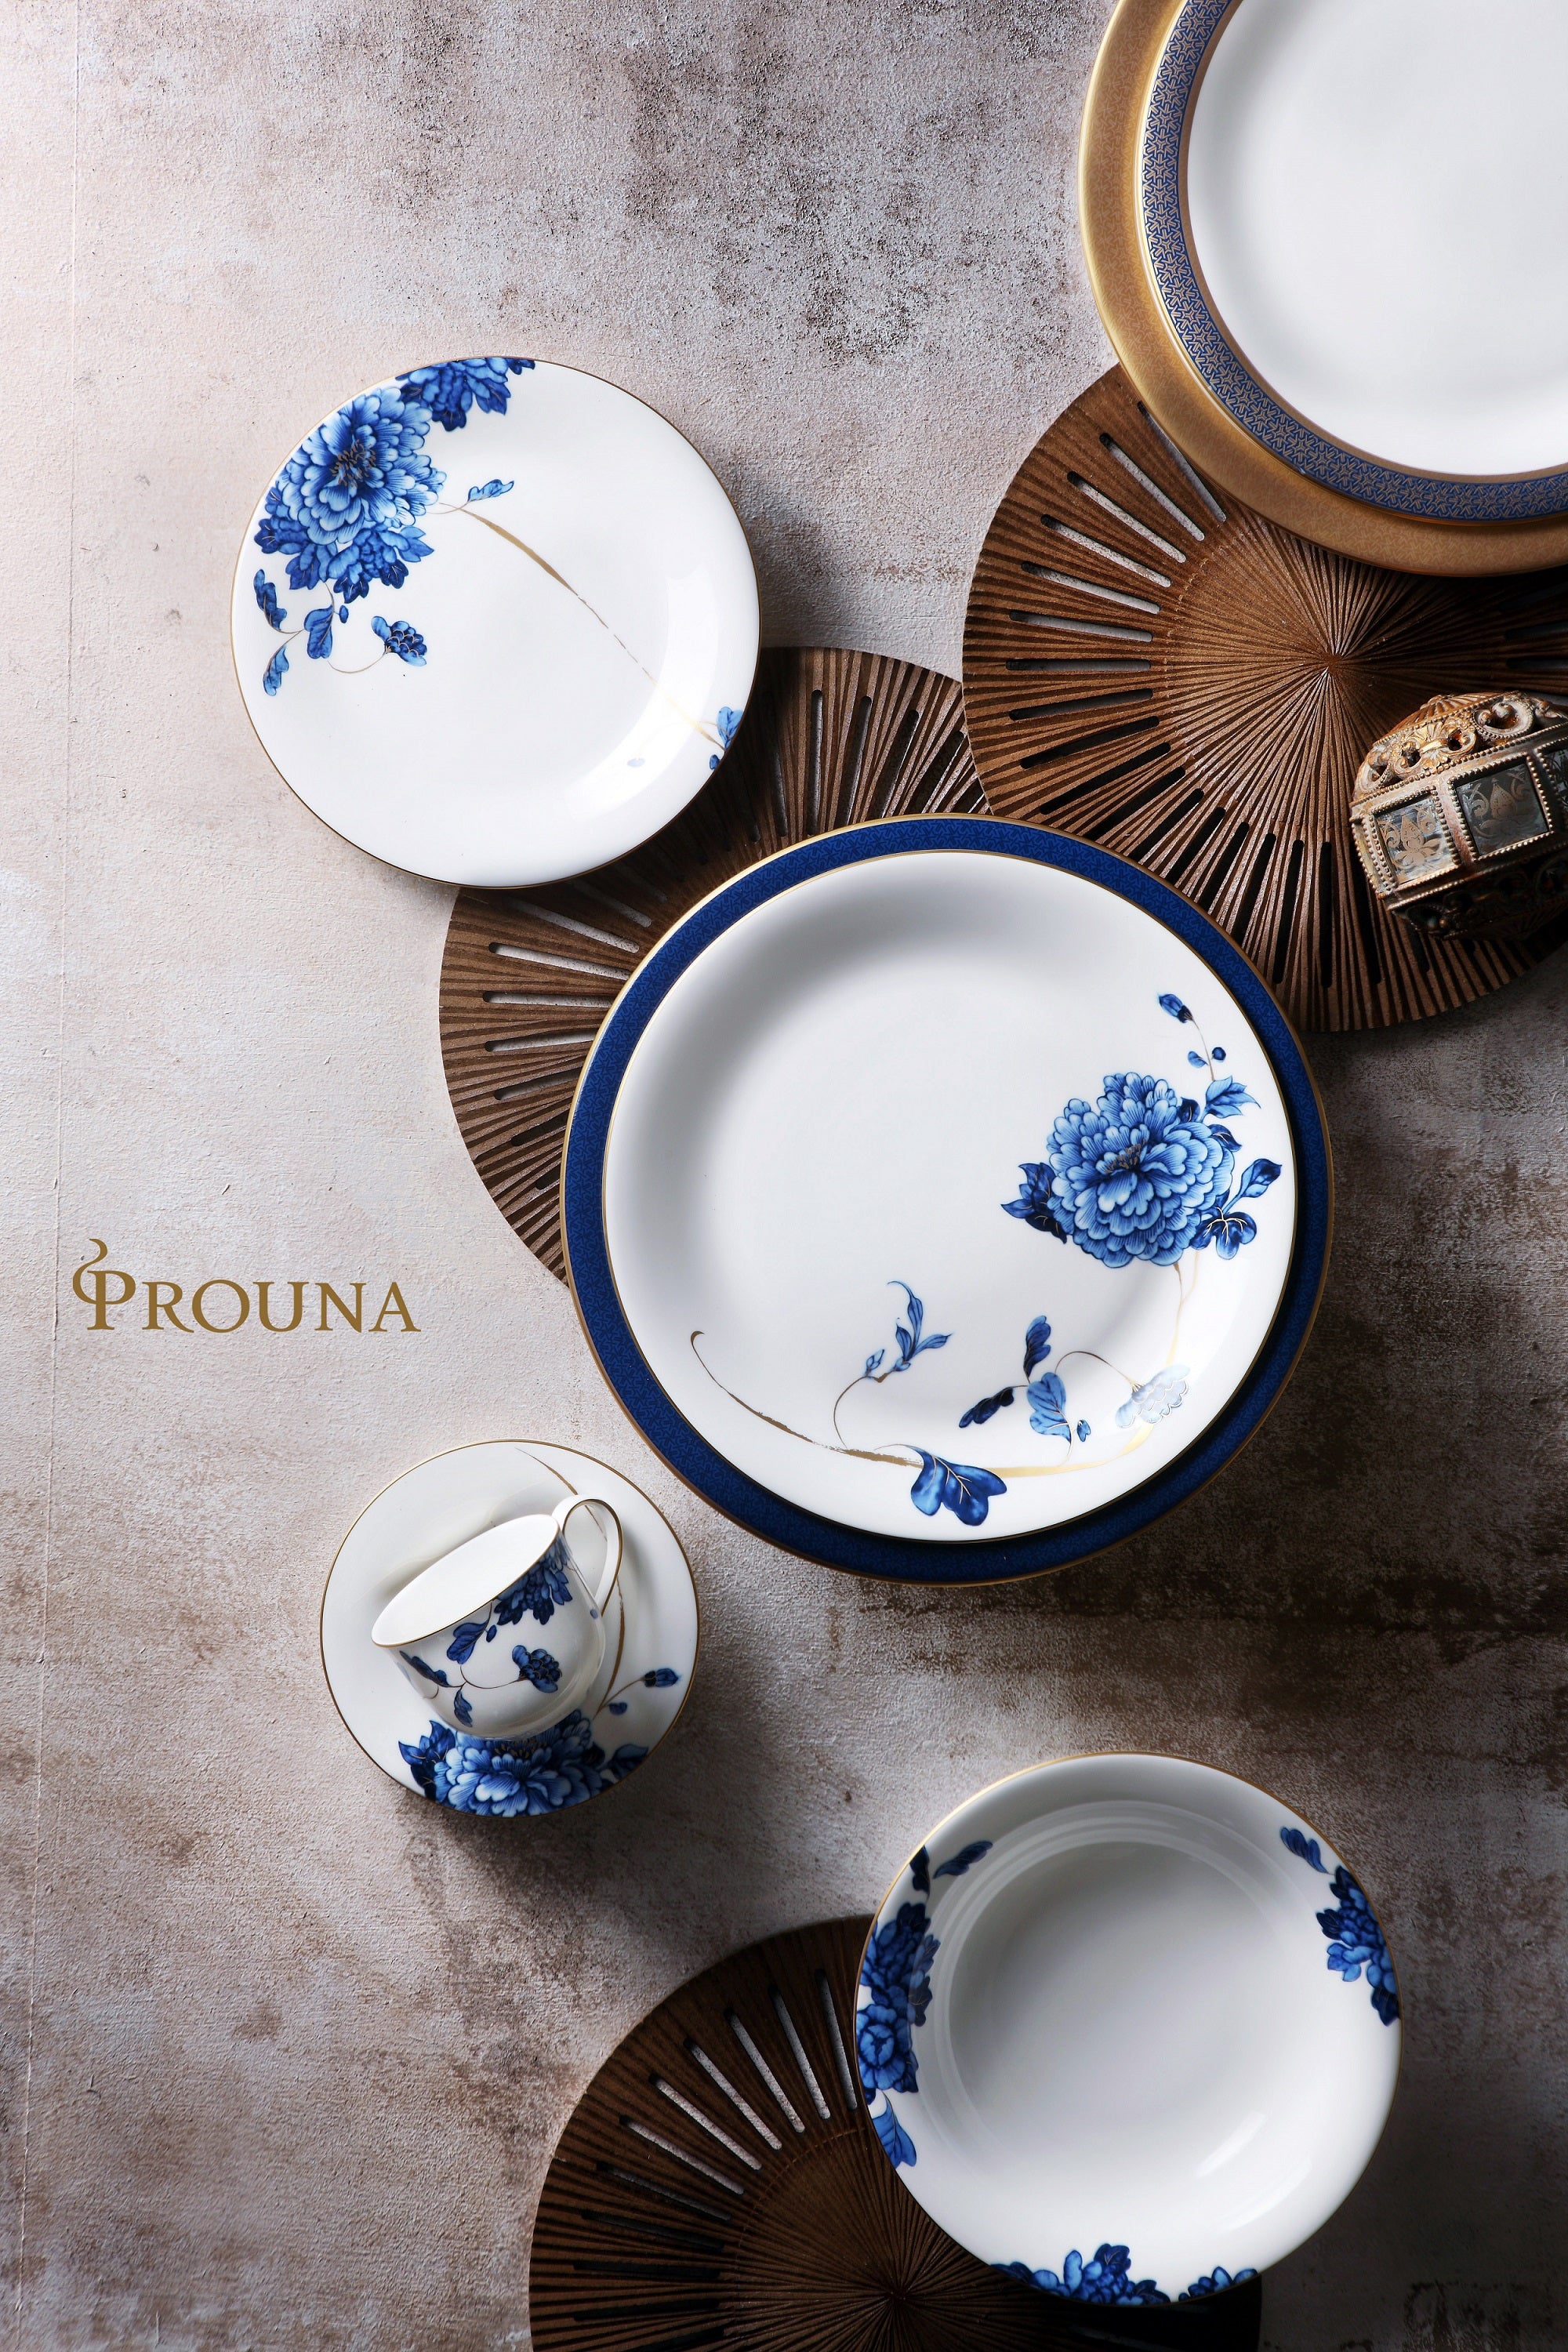 Prouna Emperor Flower collection